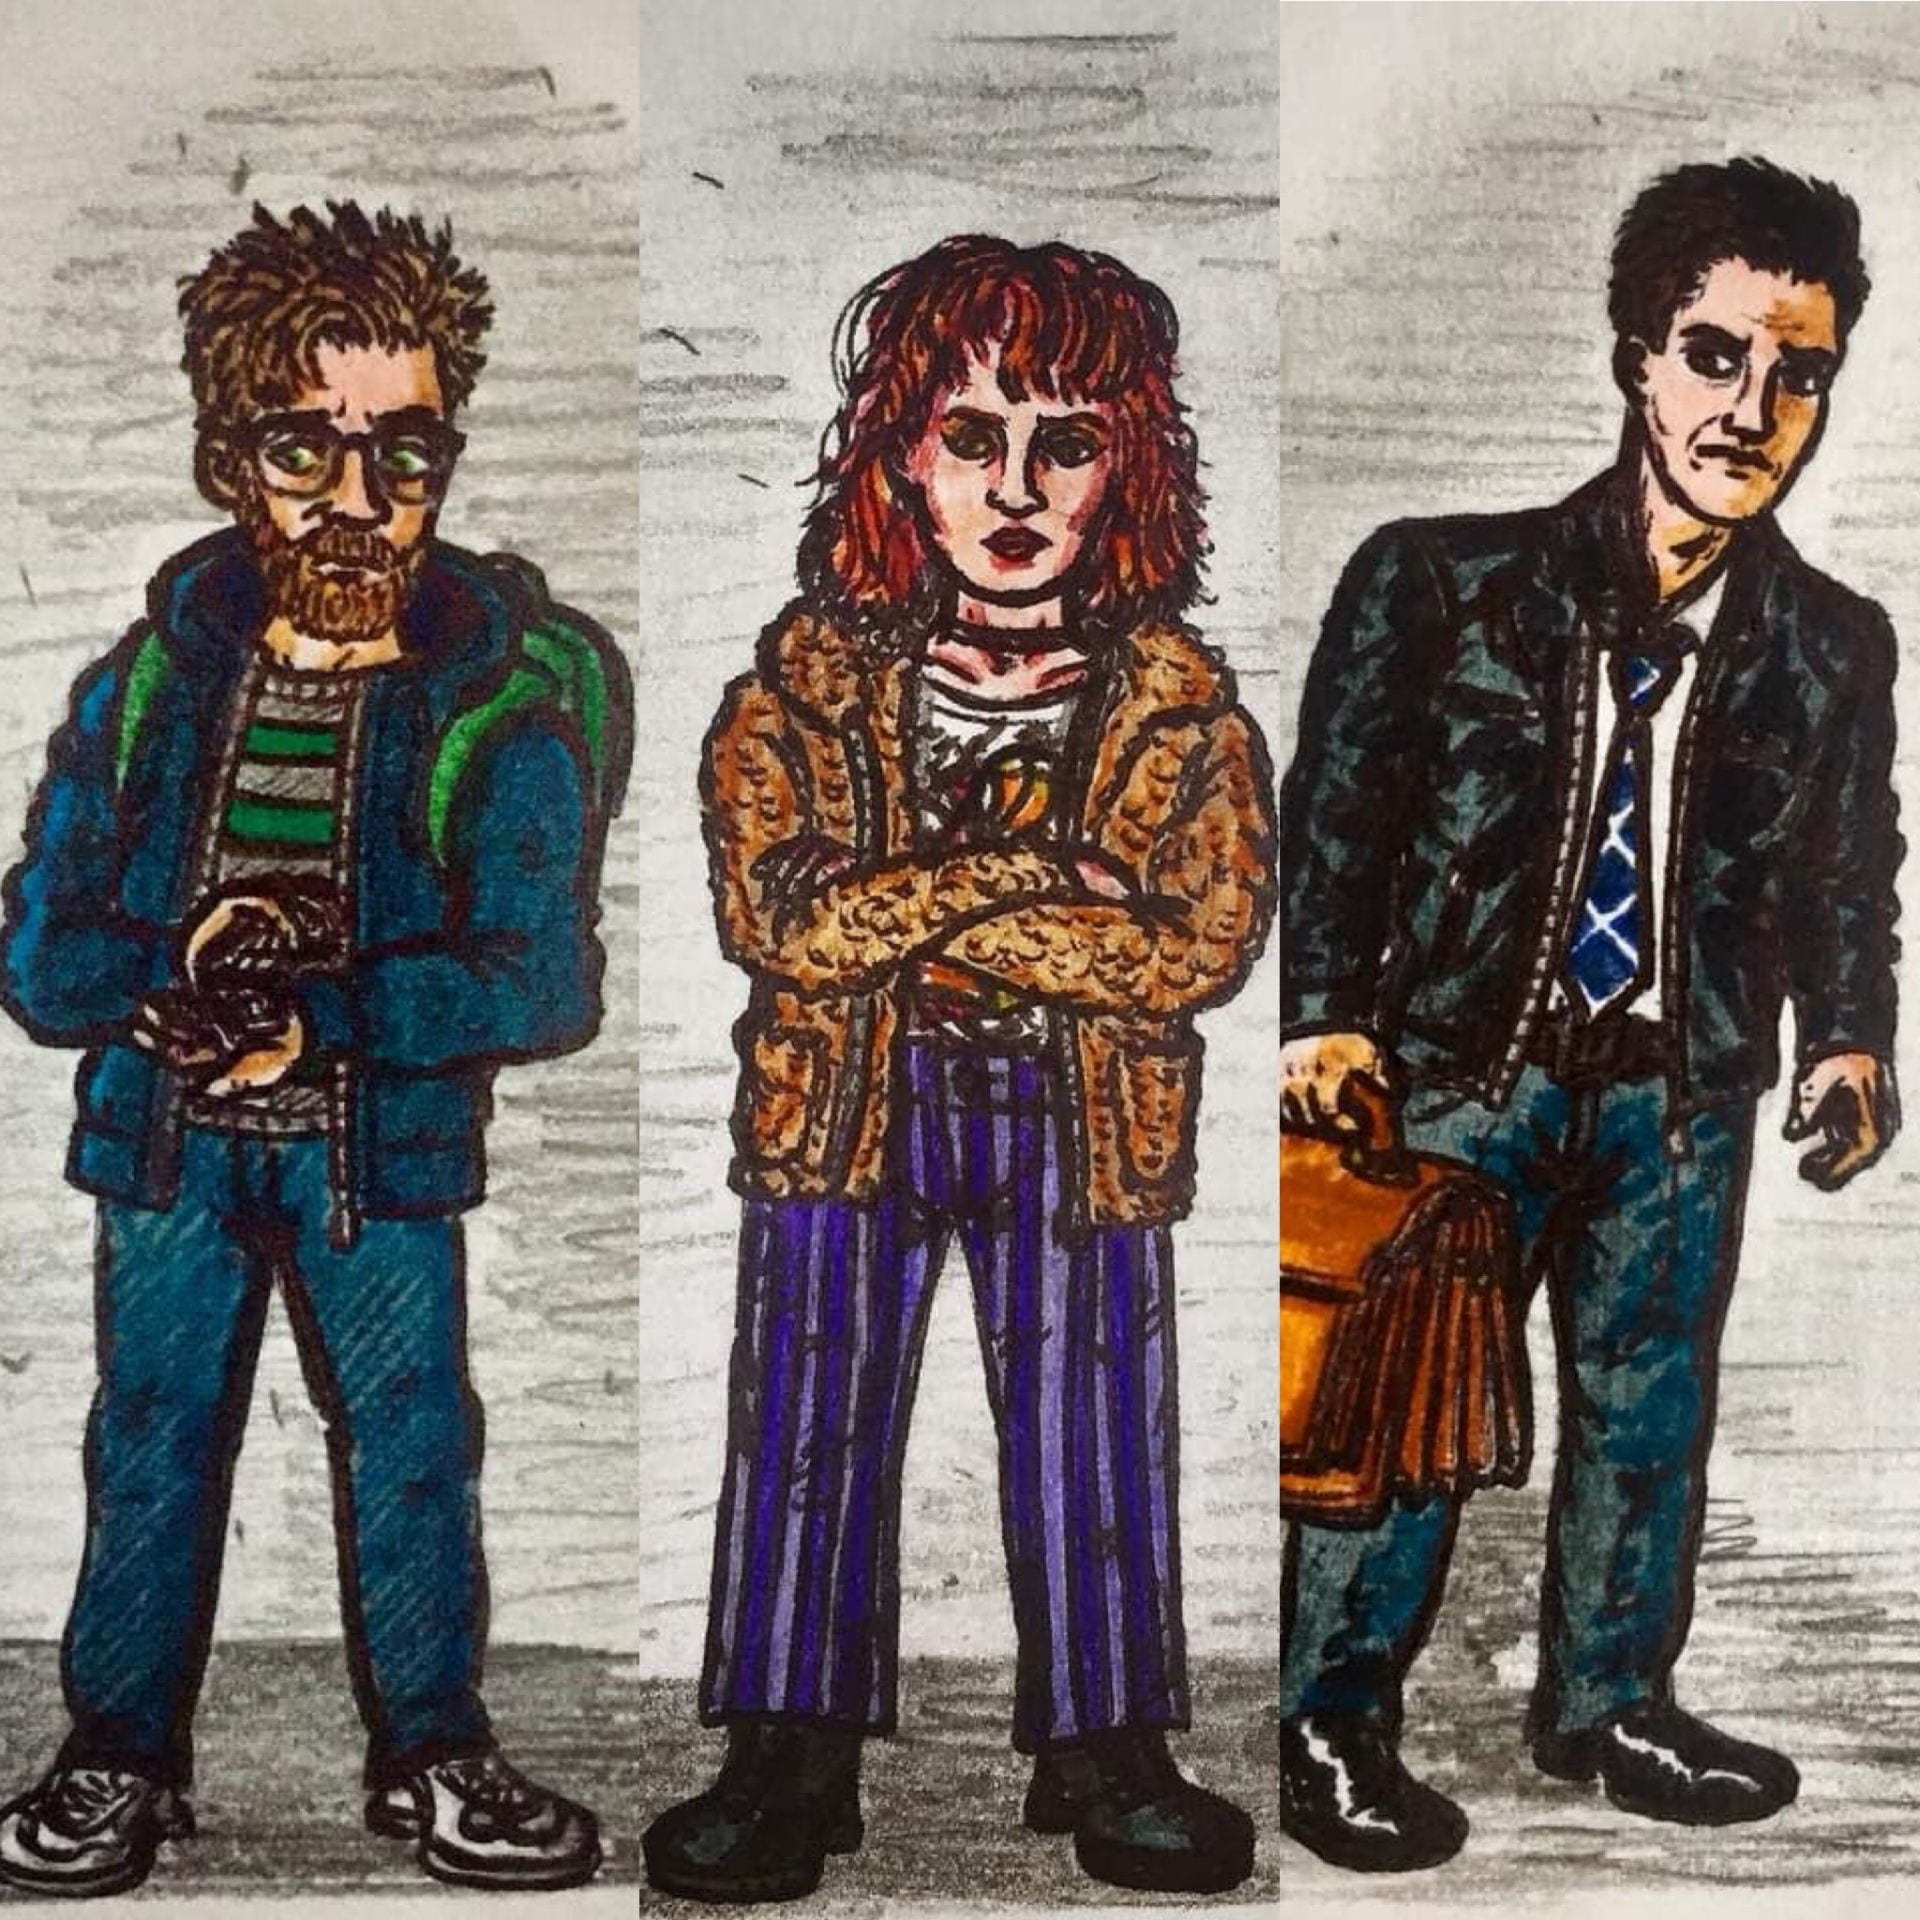 Drawings of characters; Ned, Evie & Dan. Created by James Bell.